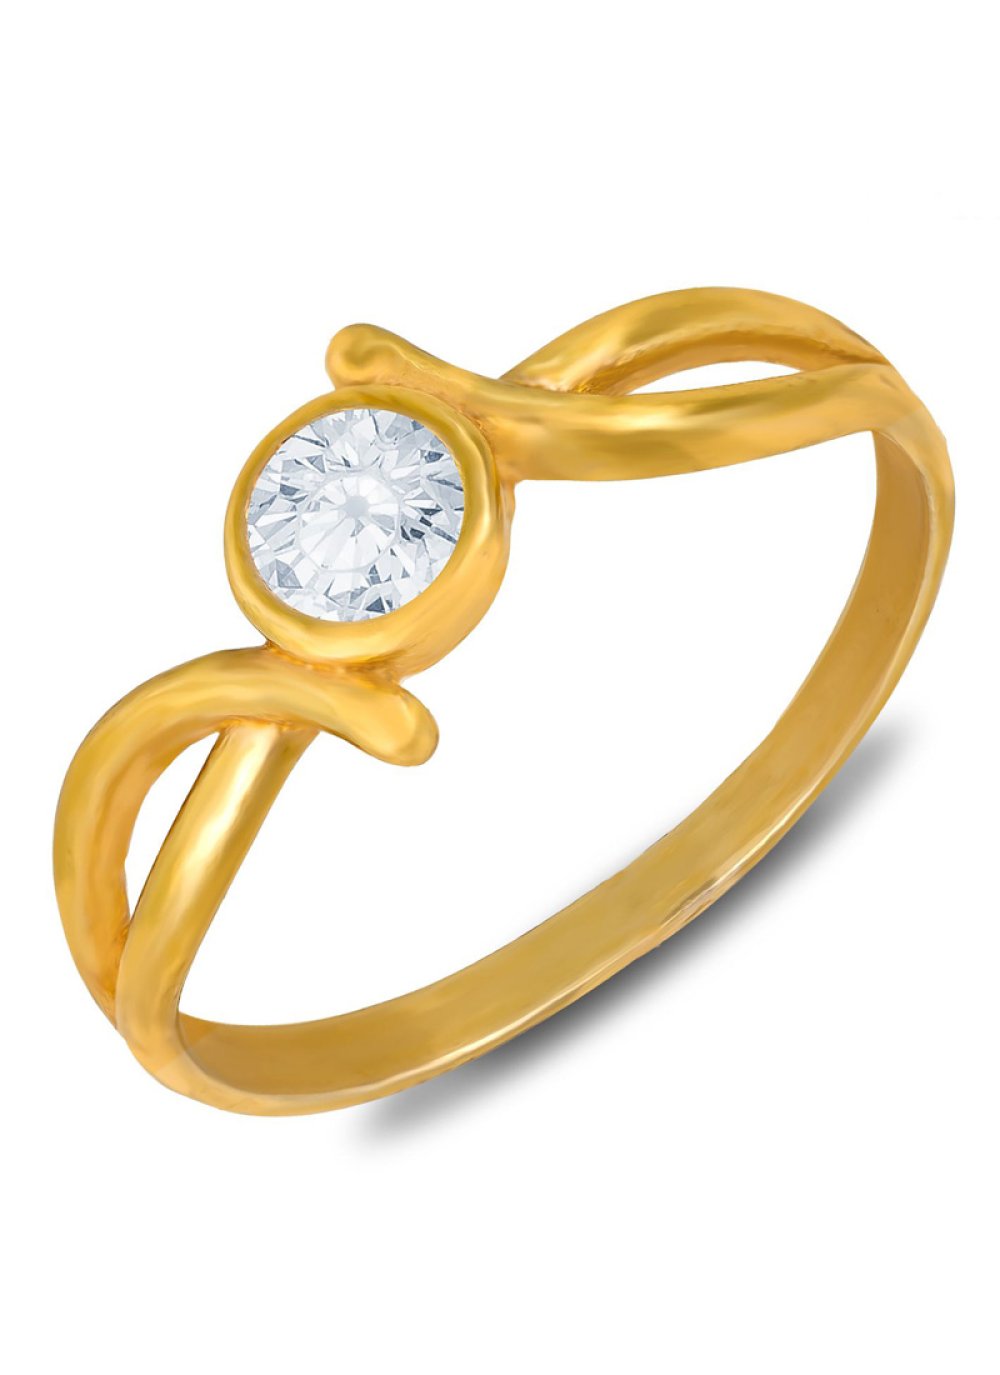 TANISHQ 18KT Gold and Diamond Finger Ring (17.20 mm) in Mumbai at best  price by Tanishq Jewellery - Justdial